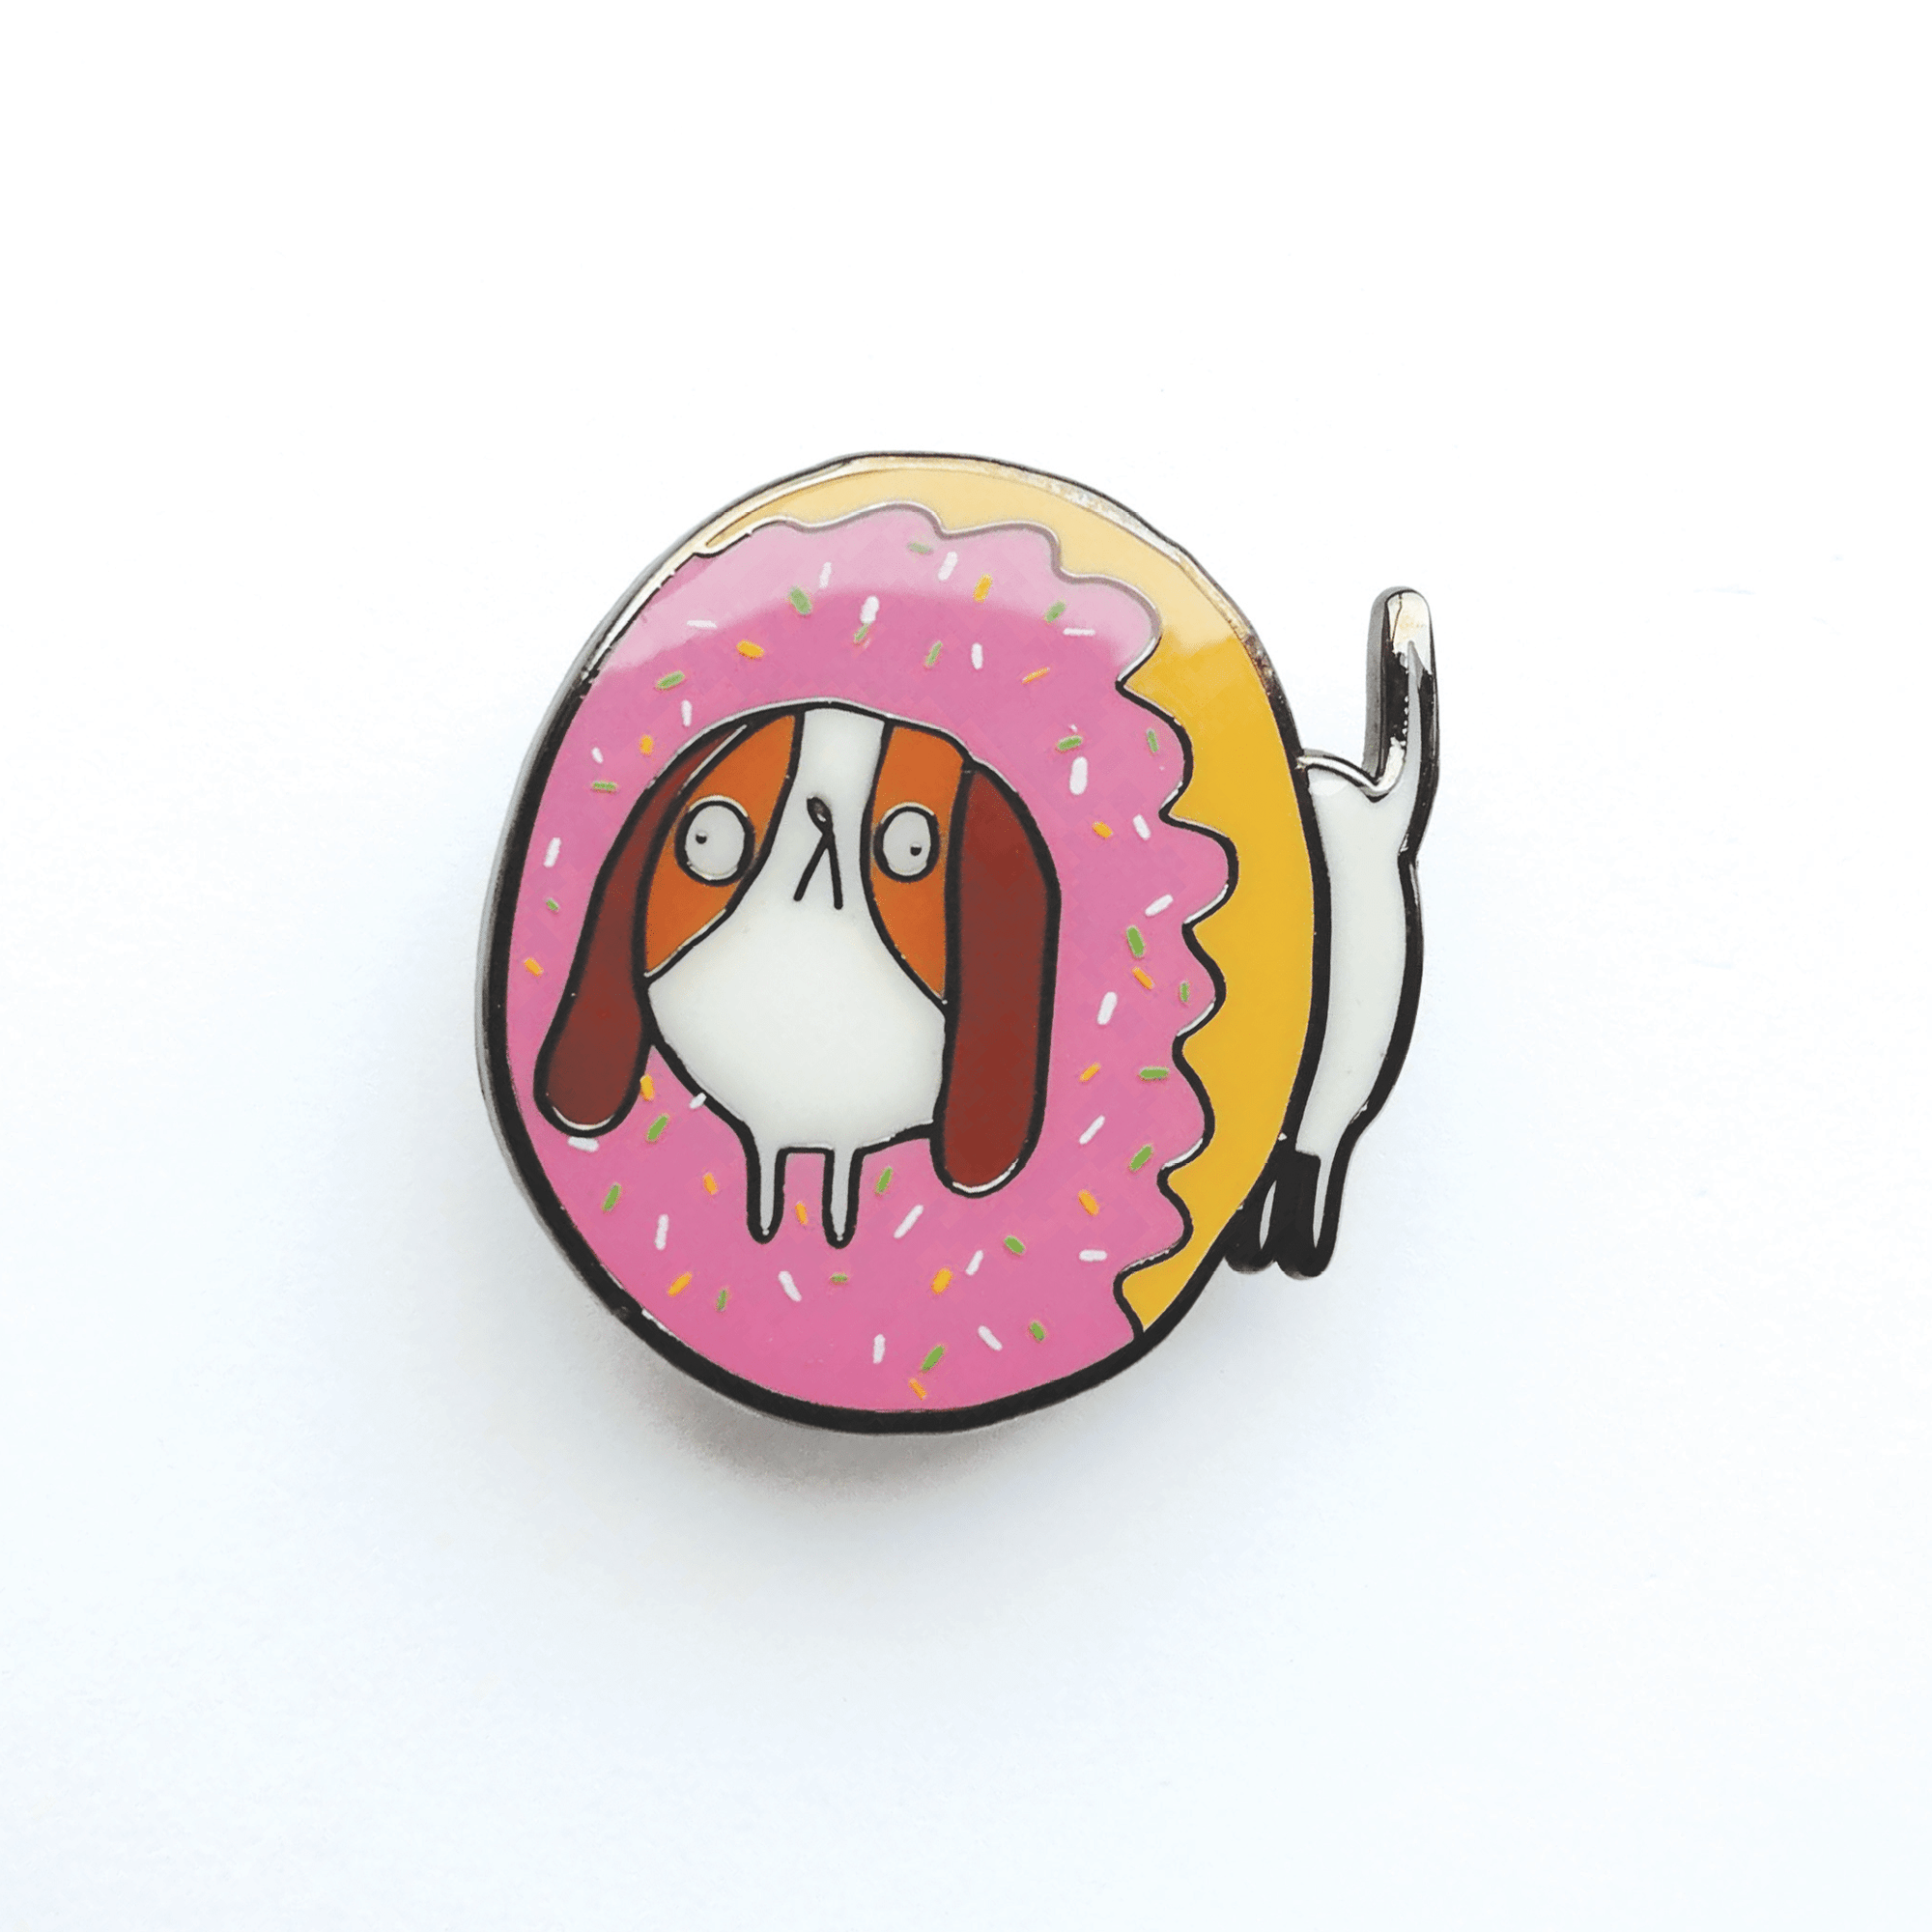 Dognut Hard Enamel Pin by Katie Abey - Whale and Bird